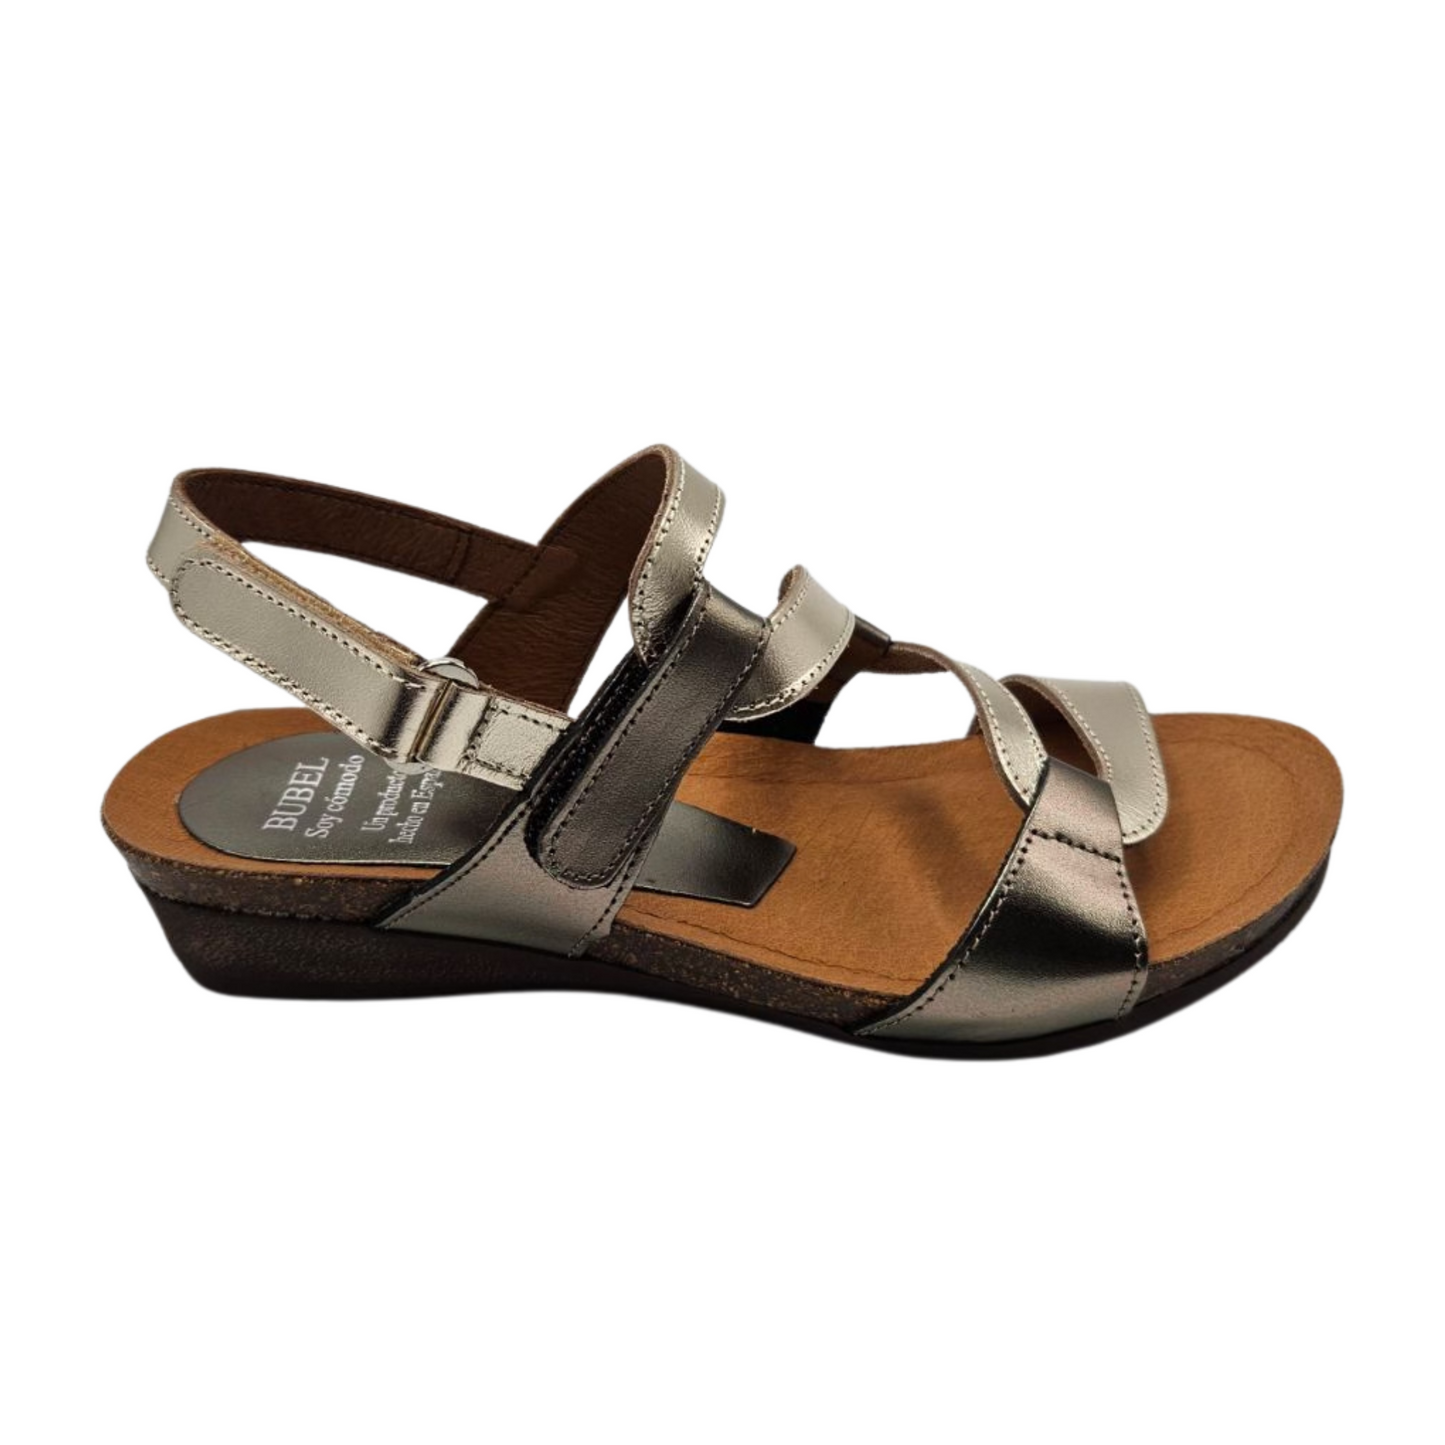 Right facing  view of metallic leather sandal with wavy strap design, rounded toe and slight wedge heel.